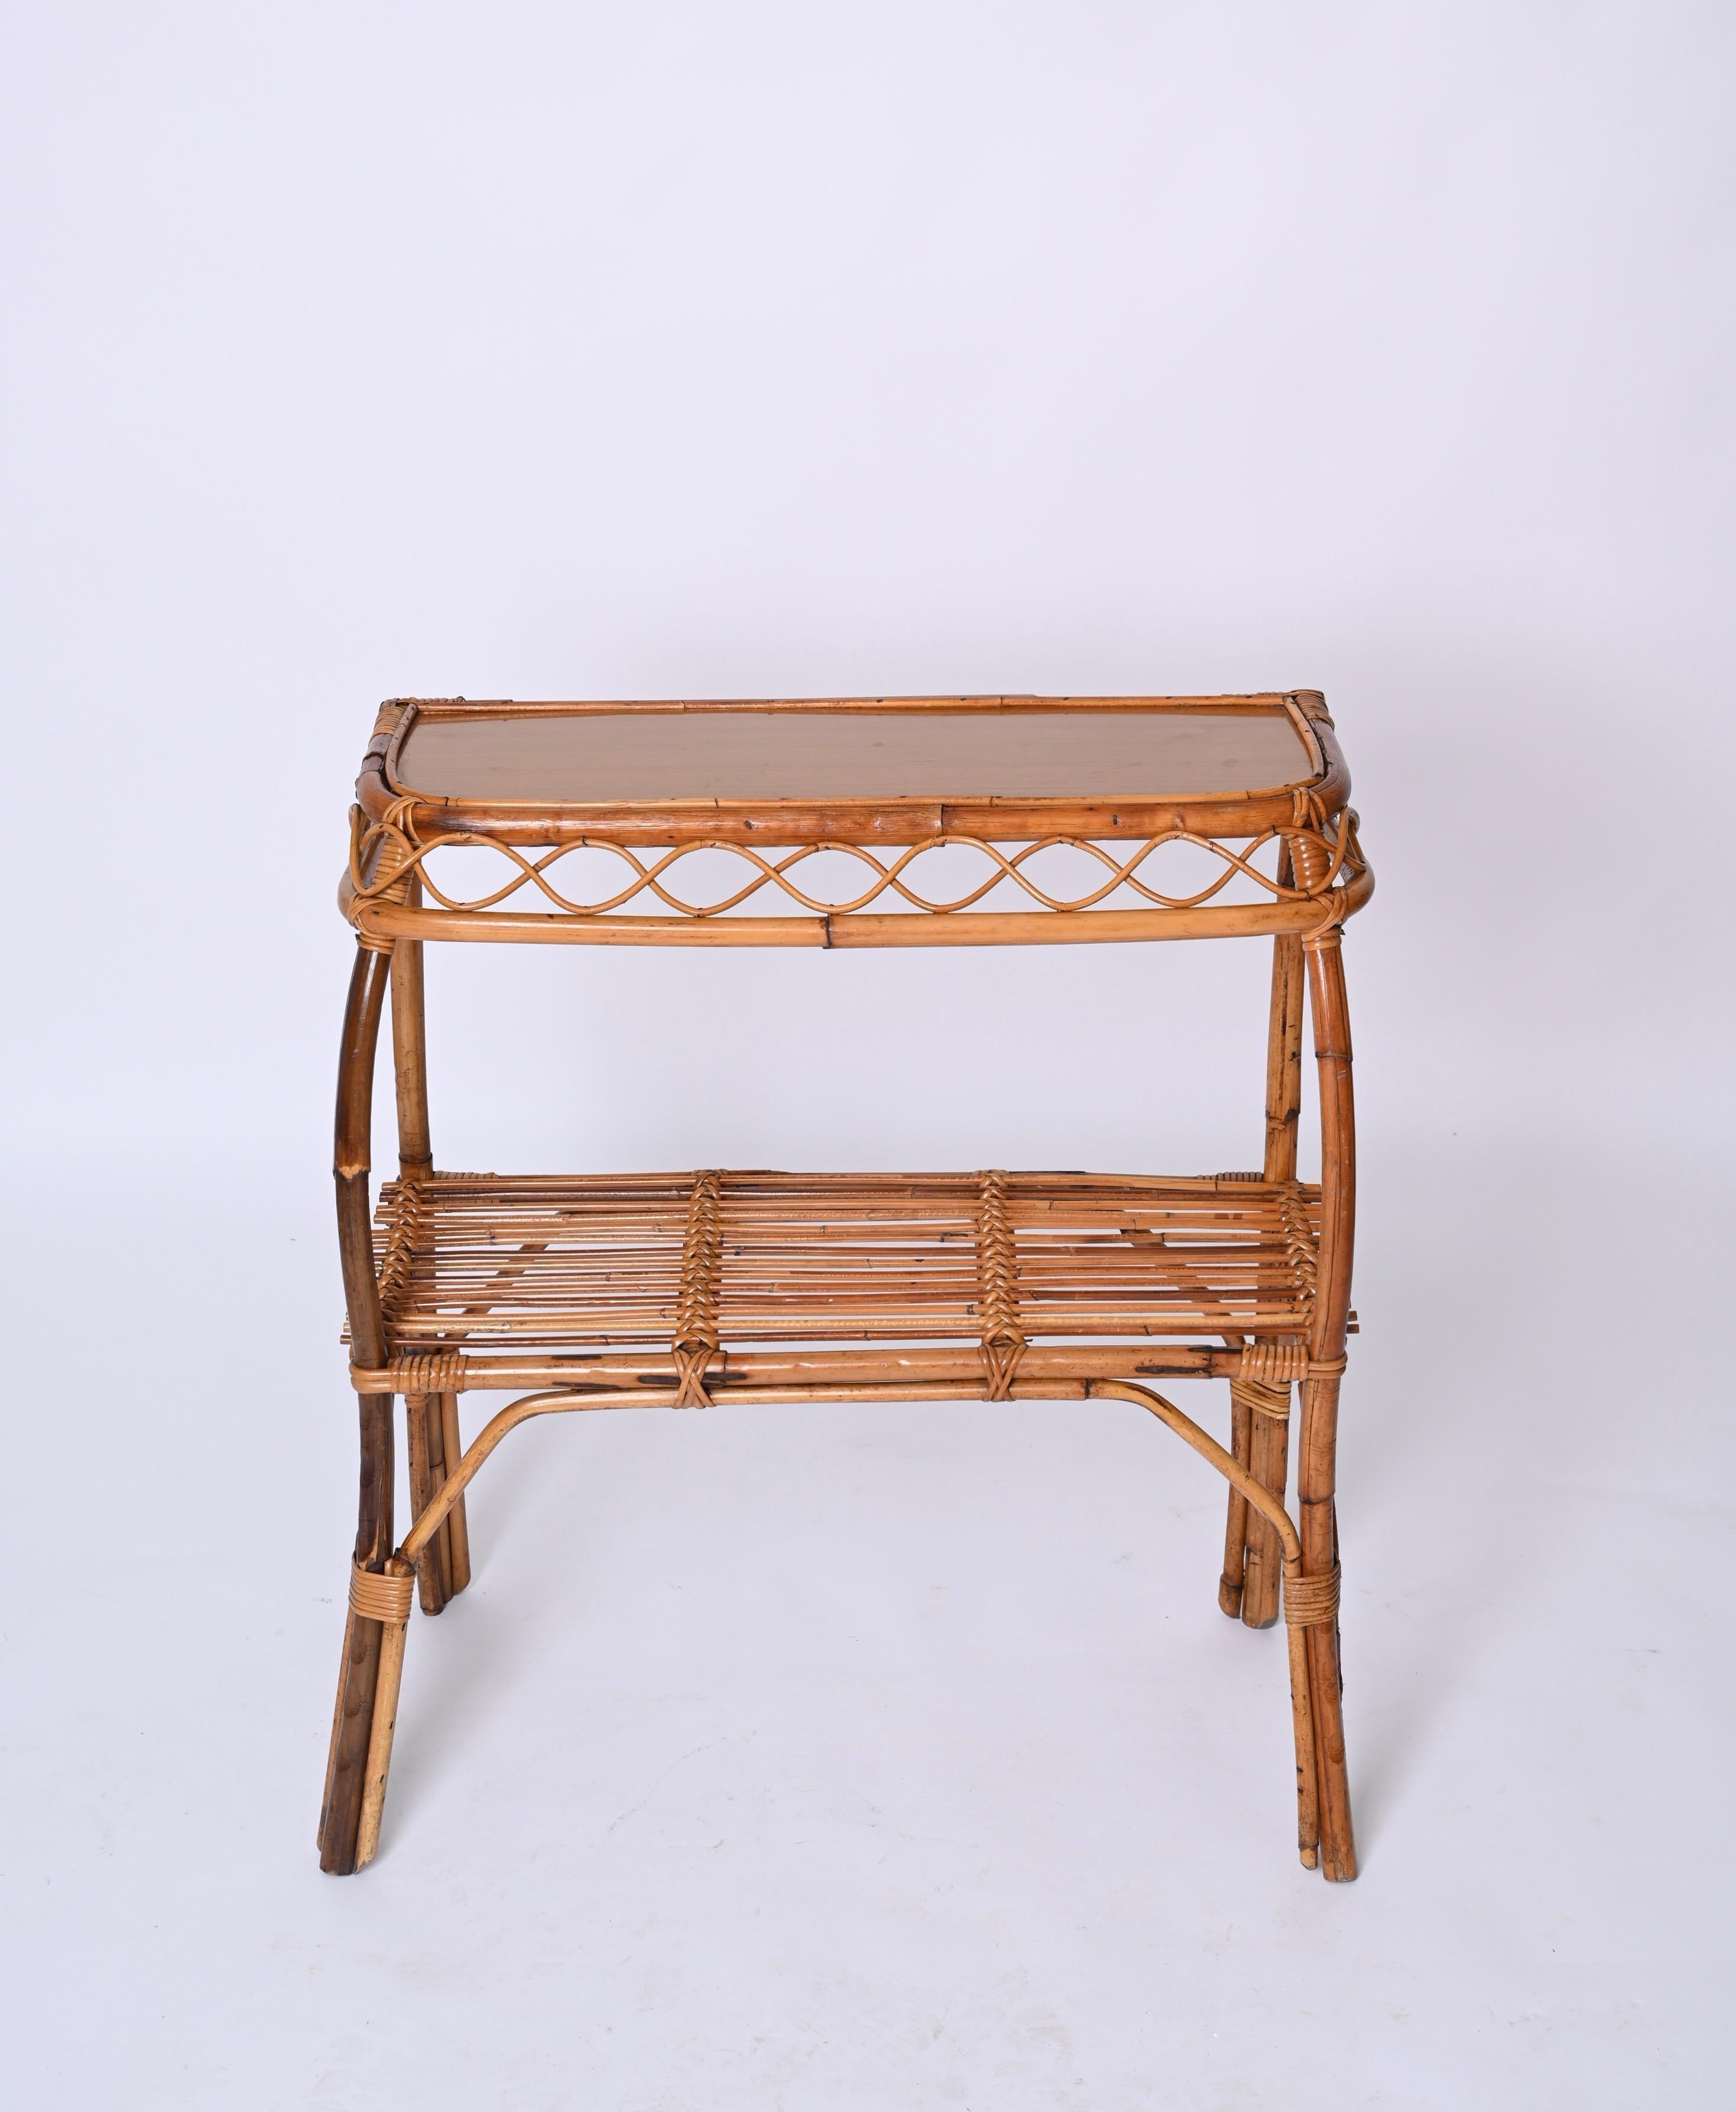 Midcentury Bamboo and Rattan Cocktail Console Table after Franco Albini, 1960s For Sale 9